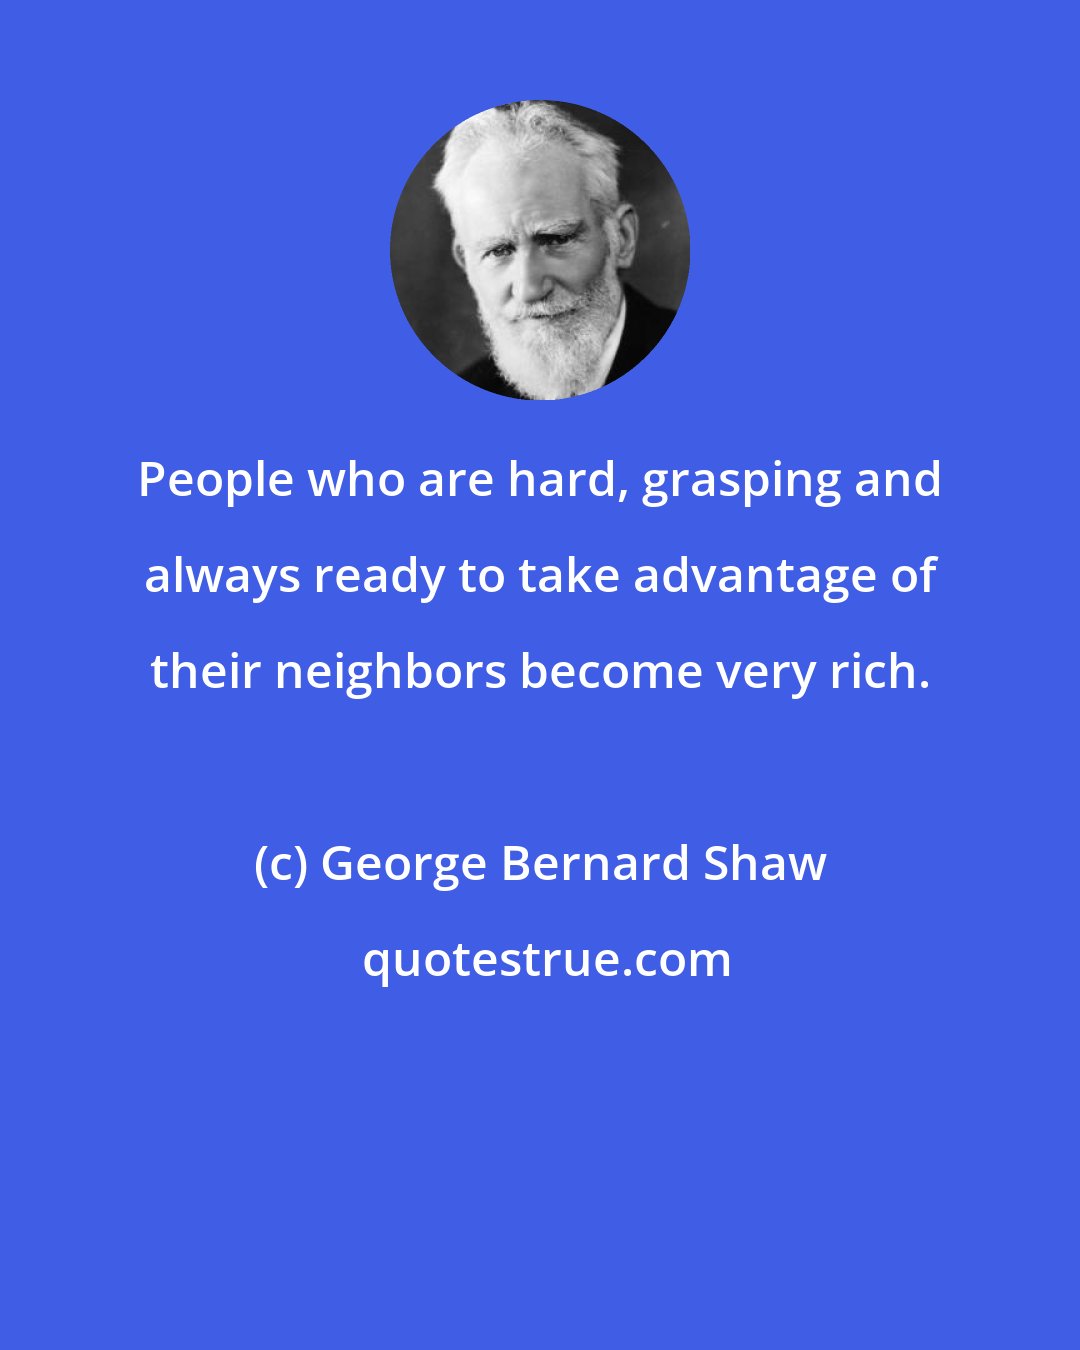 George Bernard Shaw: People who are hard, grasping and always ready to take advantage of their neighbors become very rich.